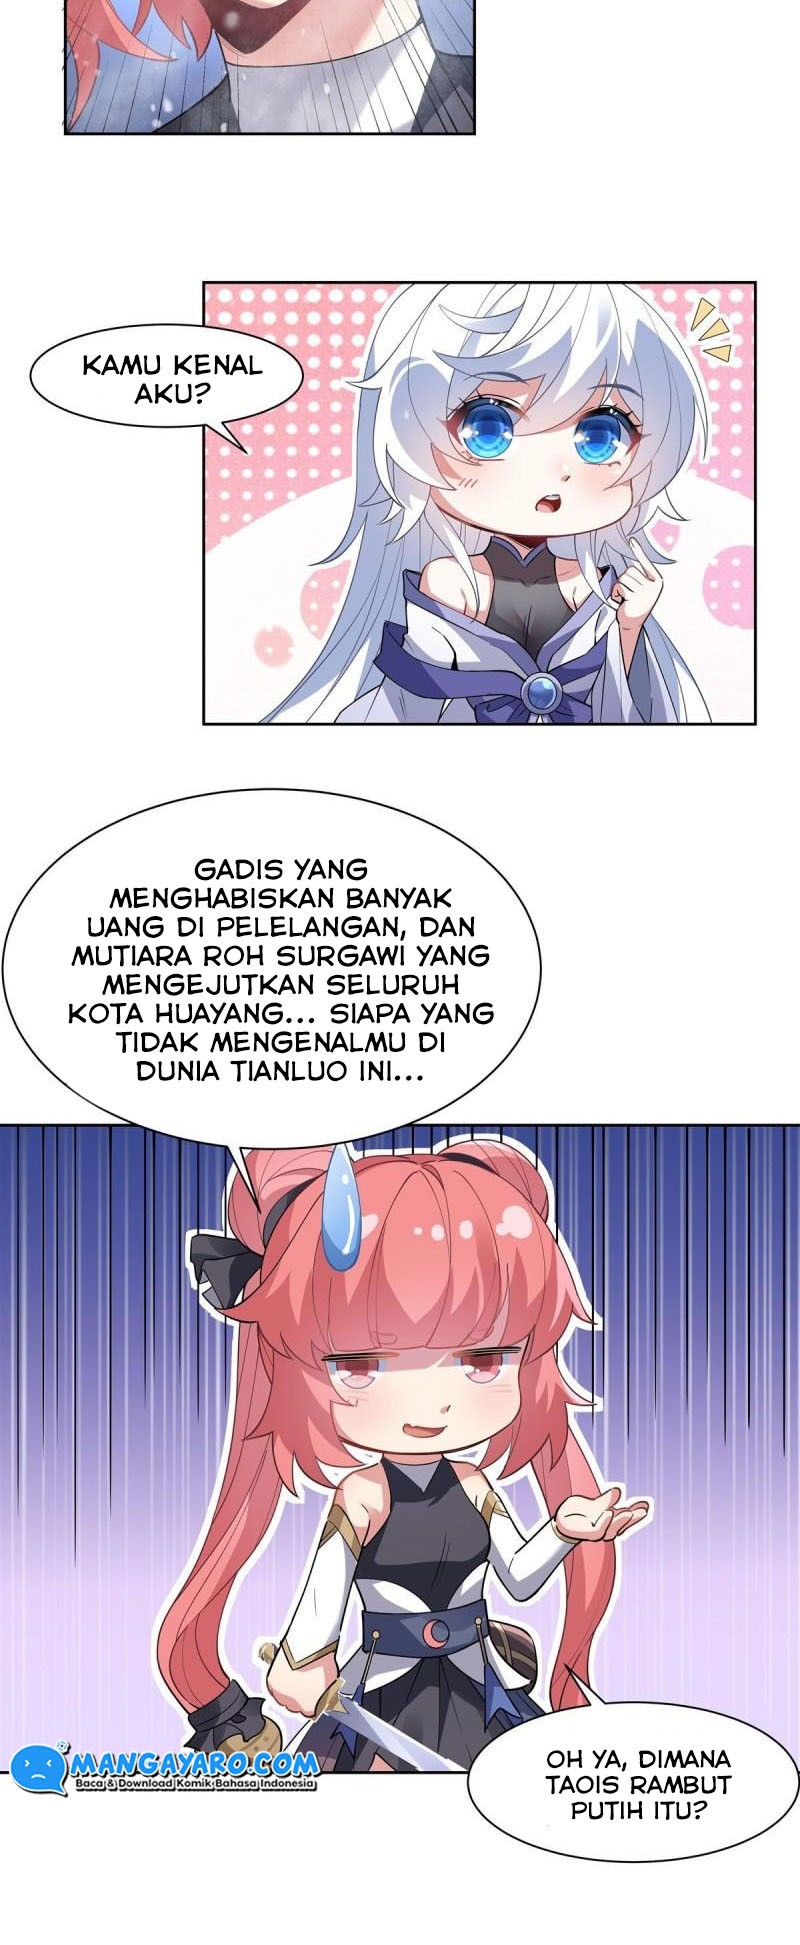 Dilarang COPAS - situs resmi www.mangacanblog.com - Komik my female apprentices are all big shots from the future 046 - chapter 46 47 Indonesia my female apprentices are all big shots from the future 046 - chapter 46 Terbaru 6|Baca Manga Komik Indonesia|Mangacan